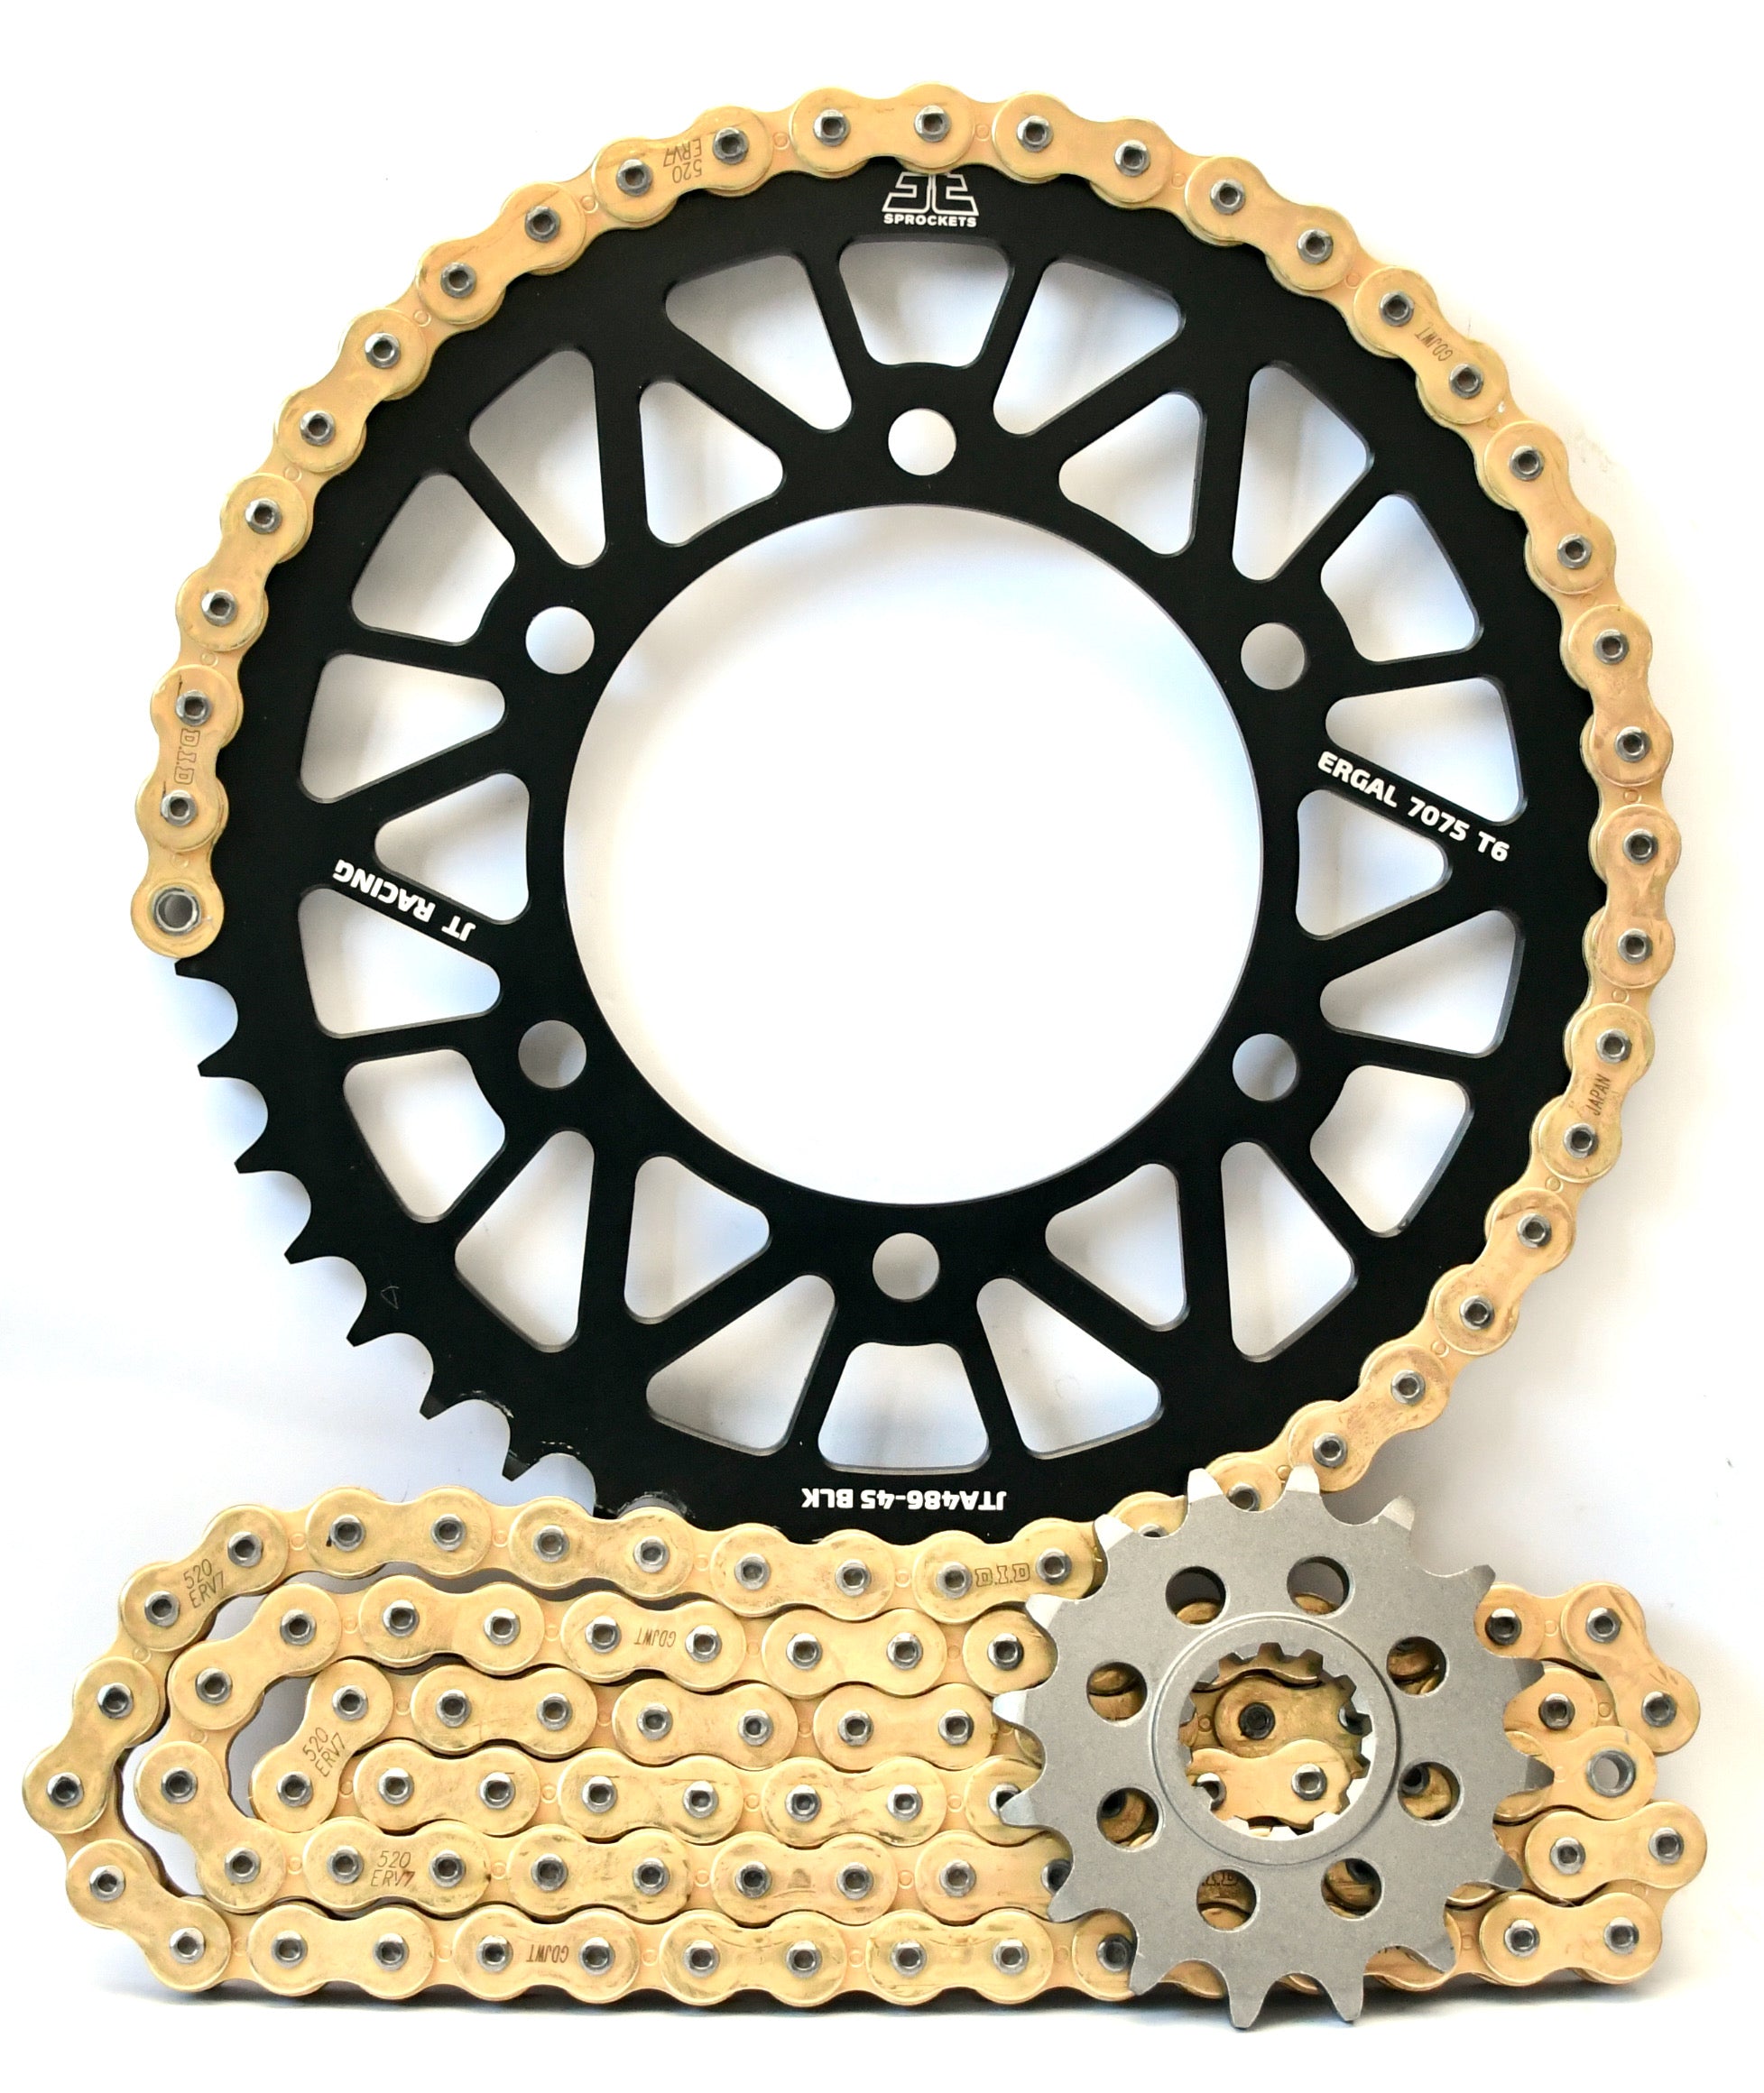 JT Racelite and DID 520 Conversion Chain & Sprocket Kit for Kawasaki ZX-10R 2004-2005 - Standard Gearing